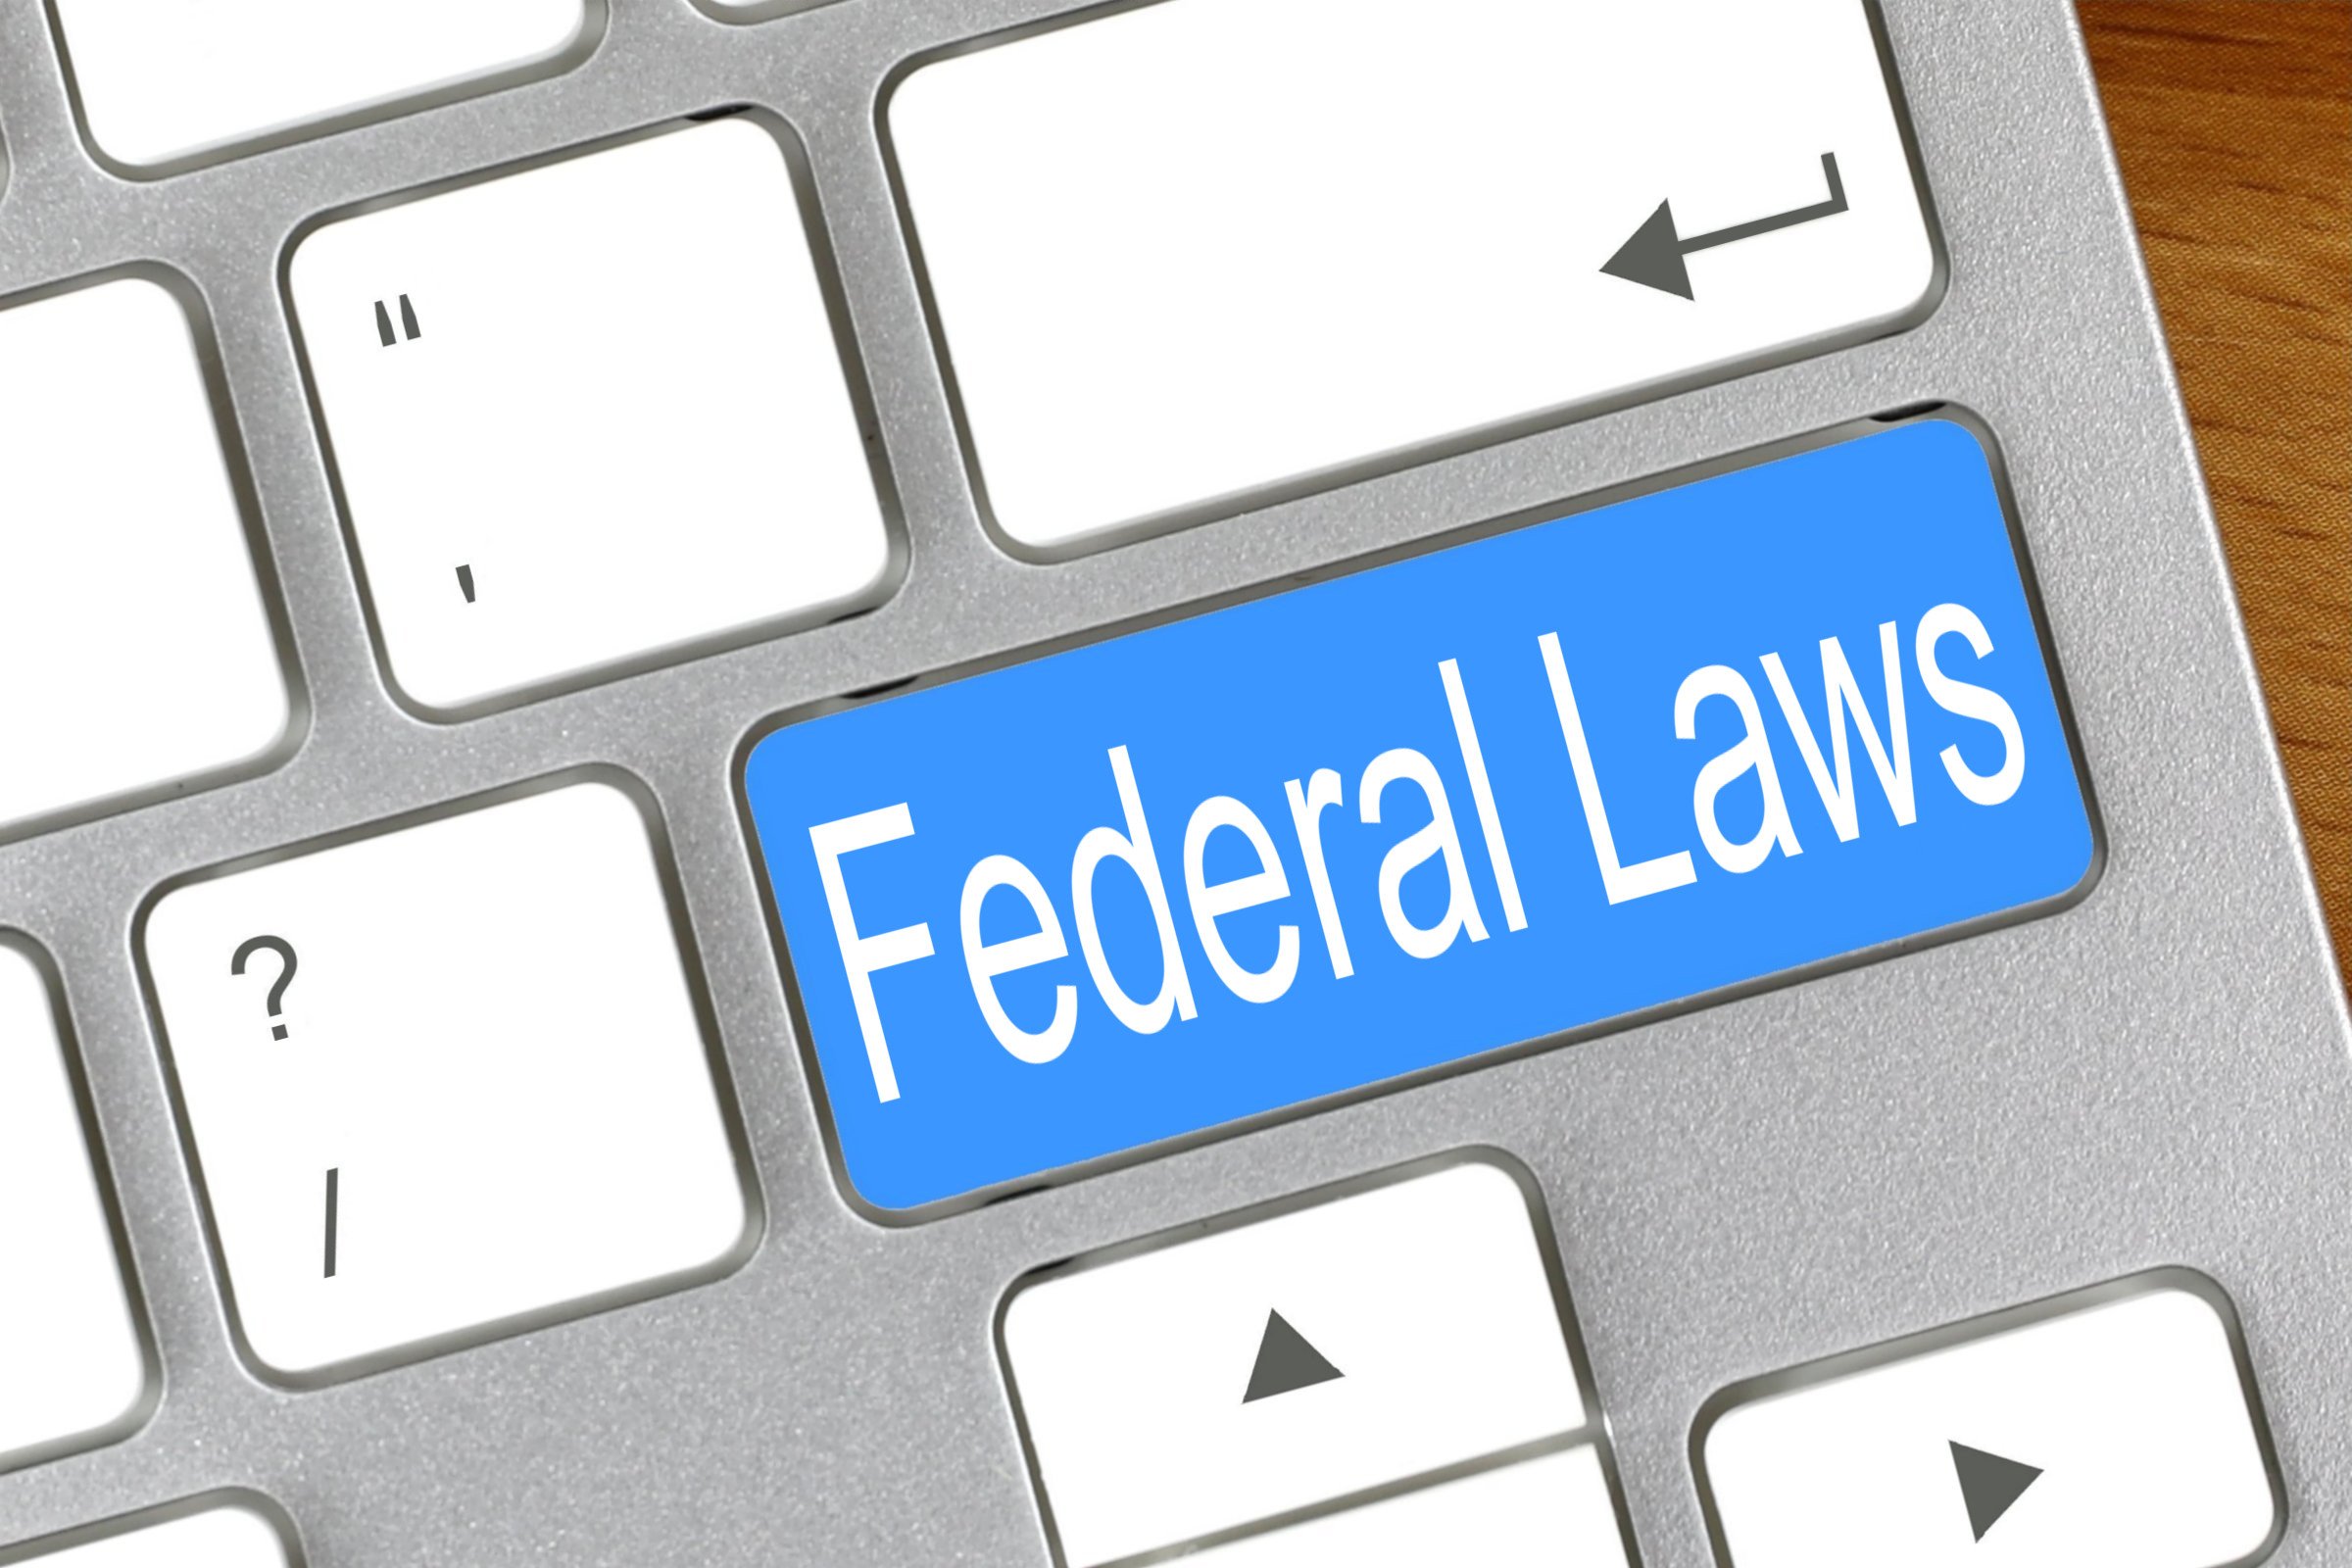 federal laws